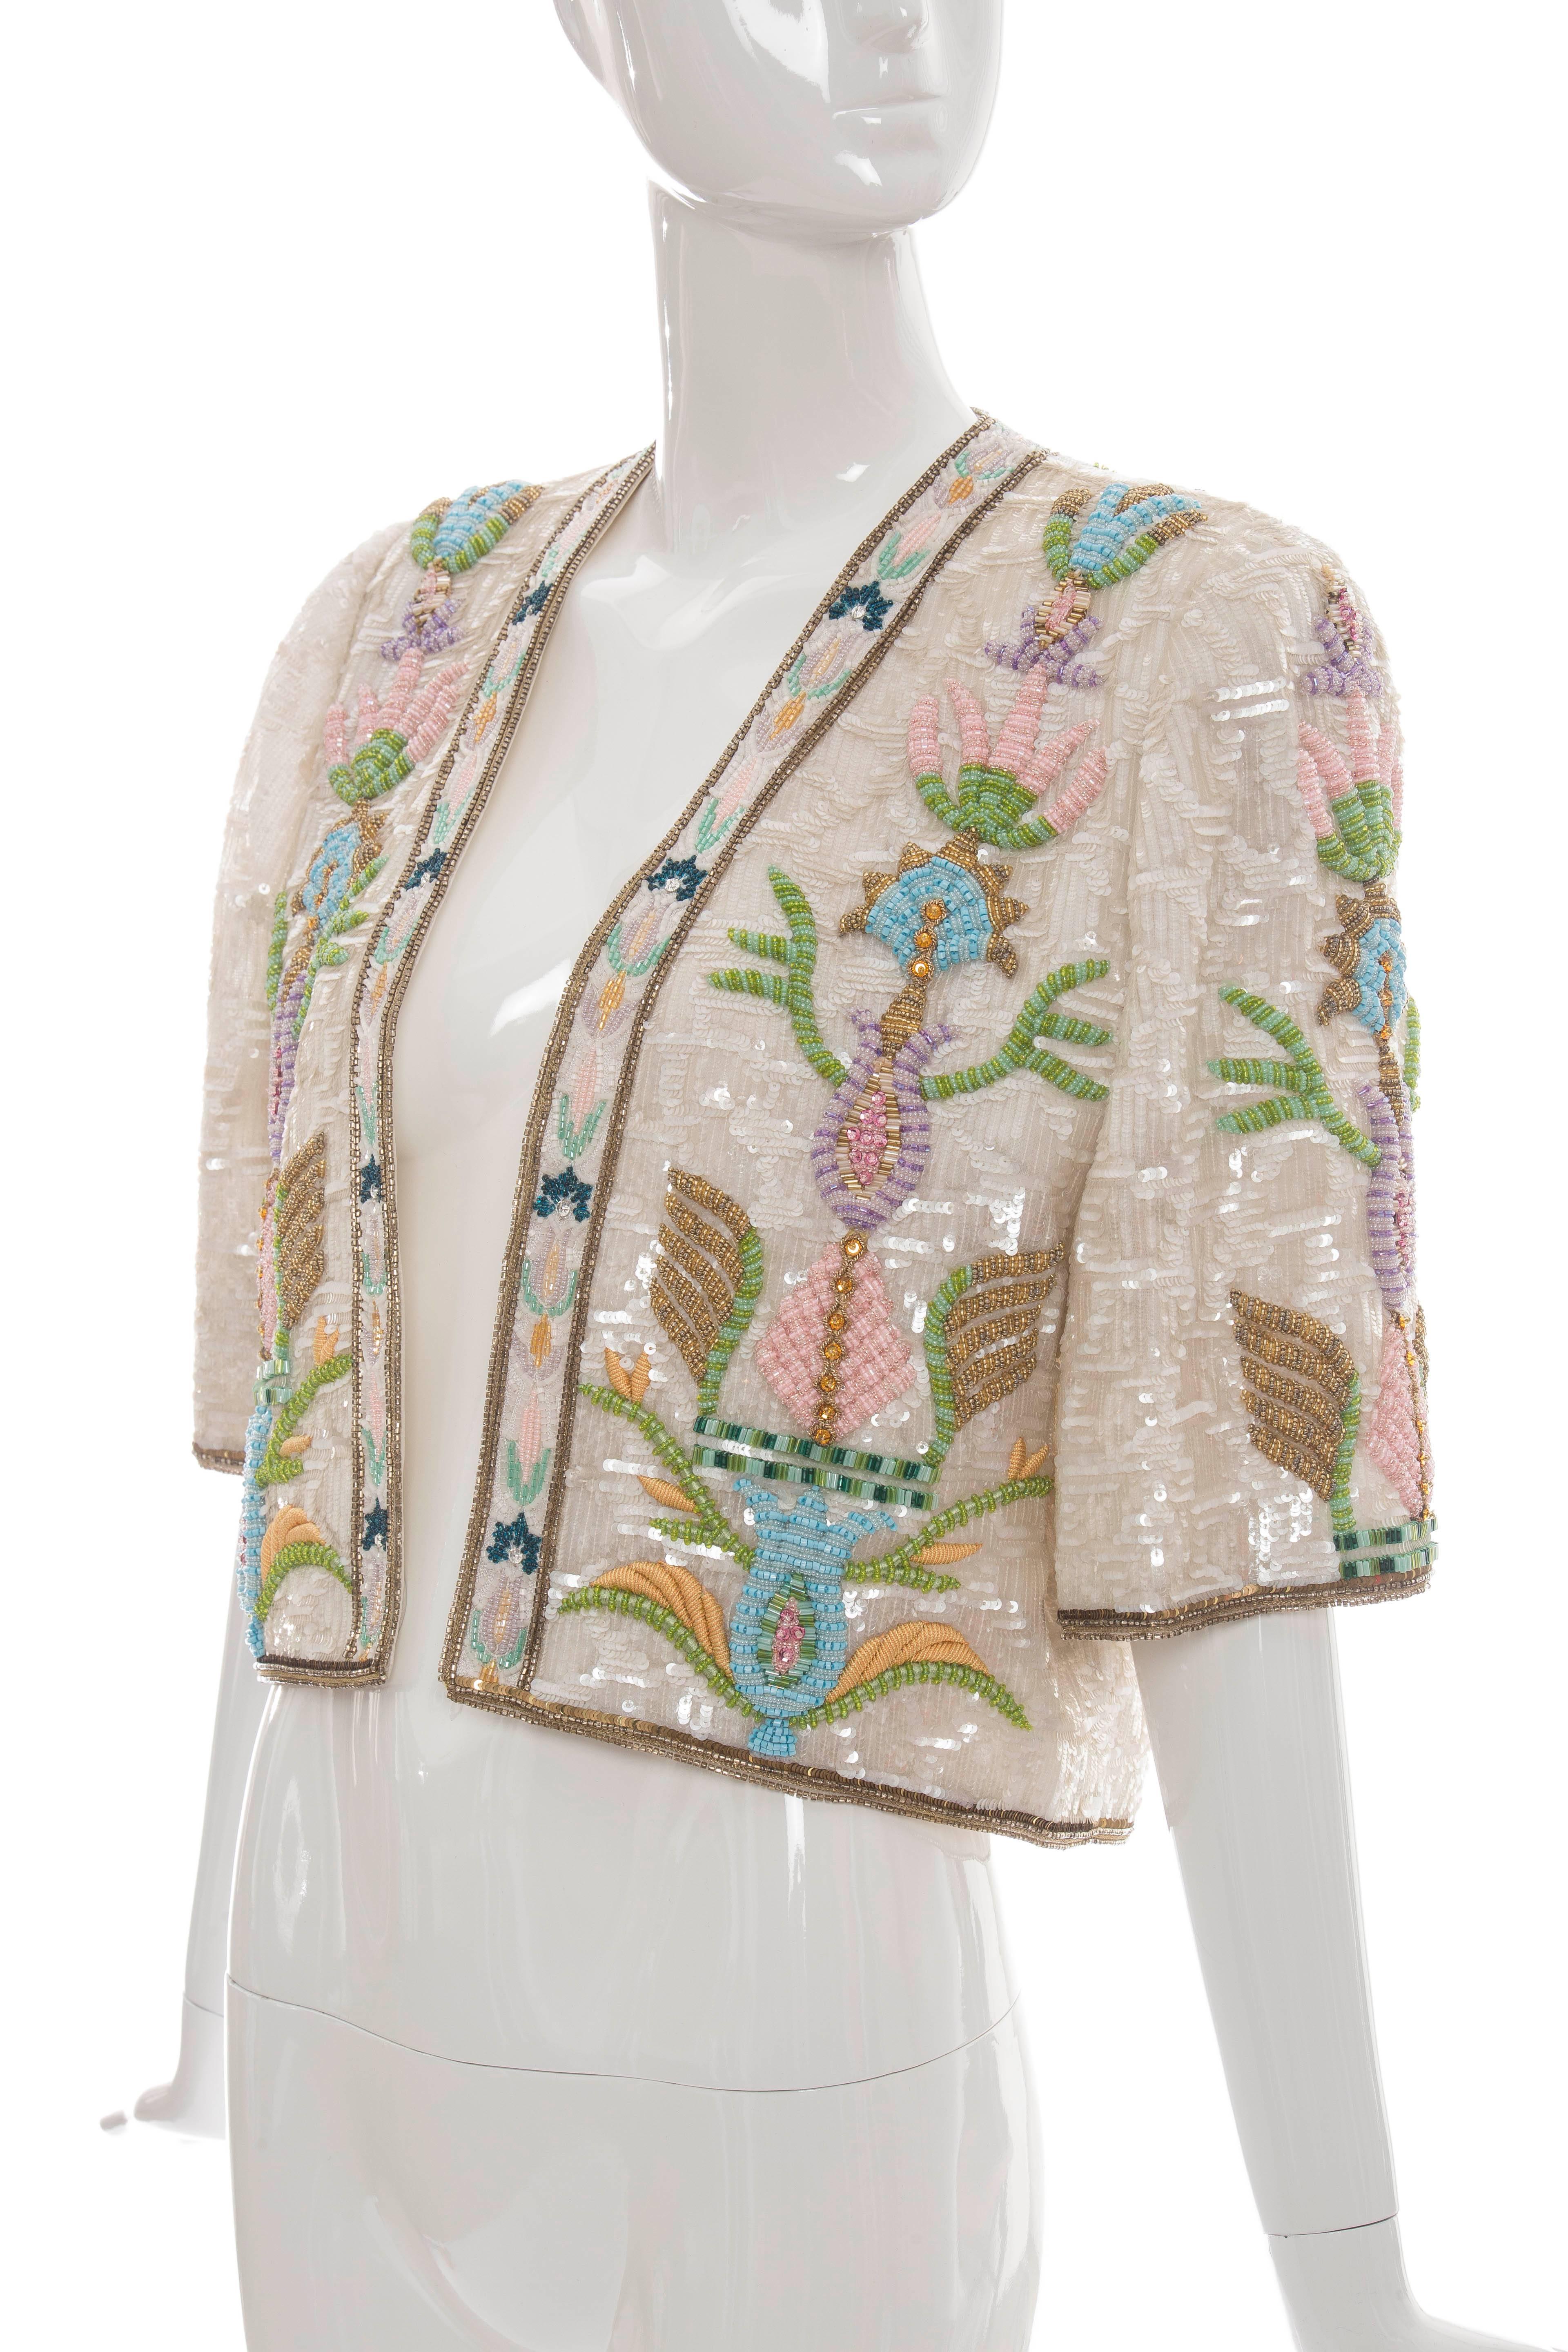 Mary McFadden Pearlescent Sequin And Beaded Evening Jacket, Circa 1980's 2